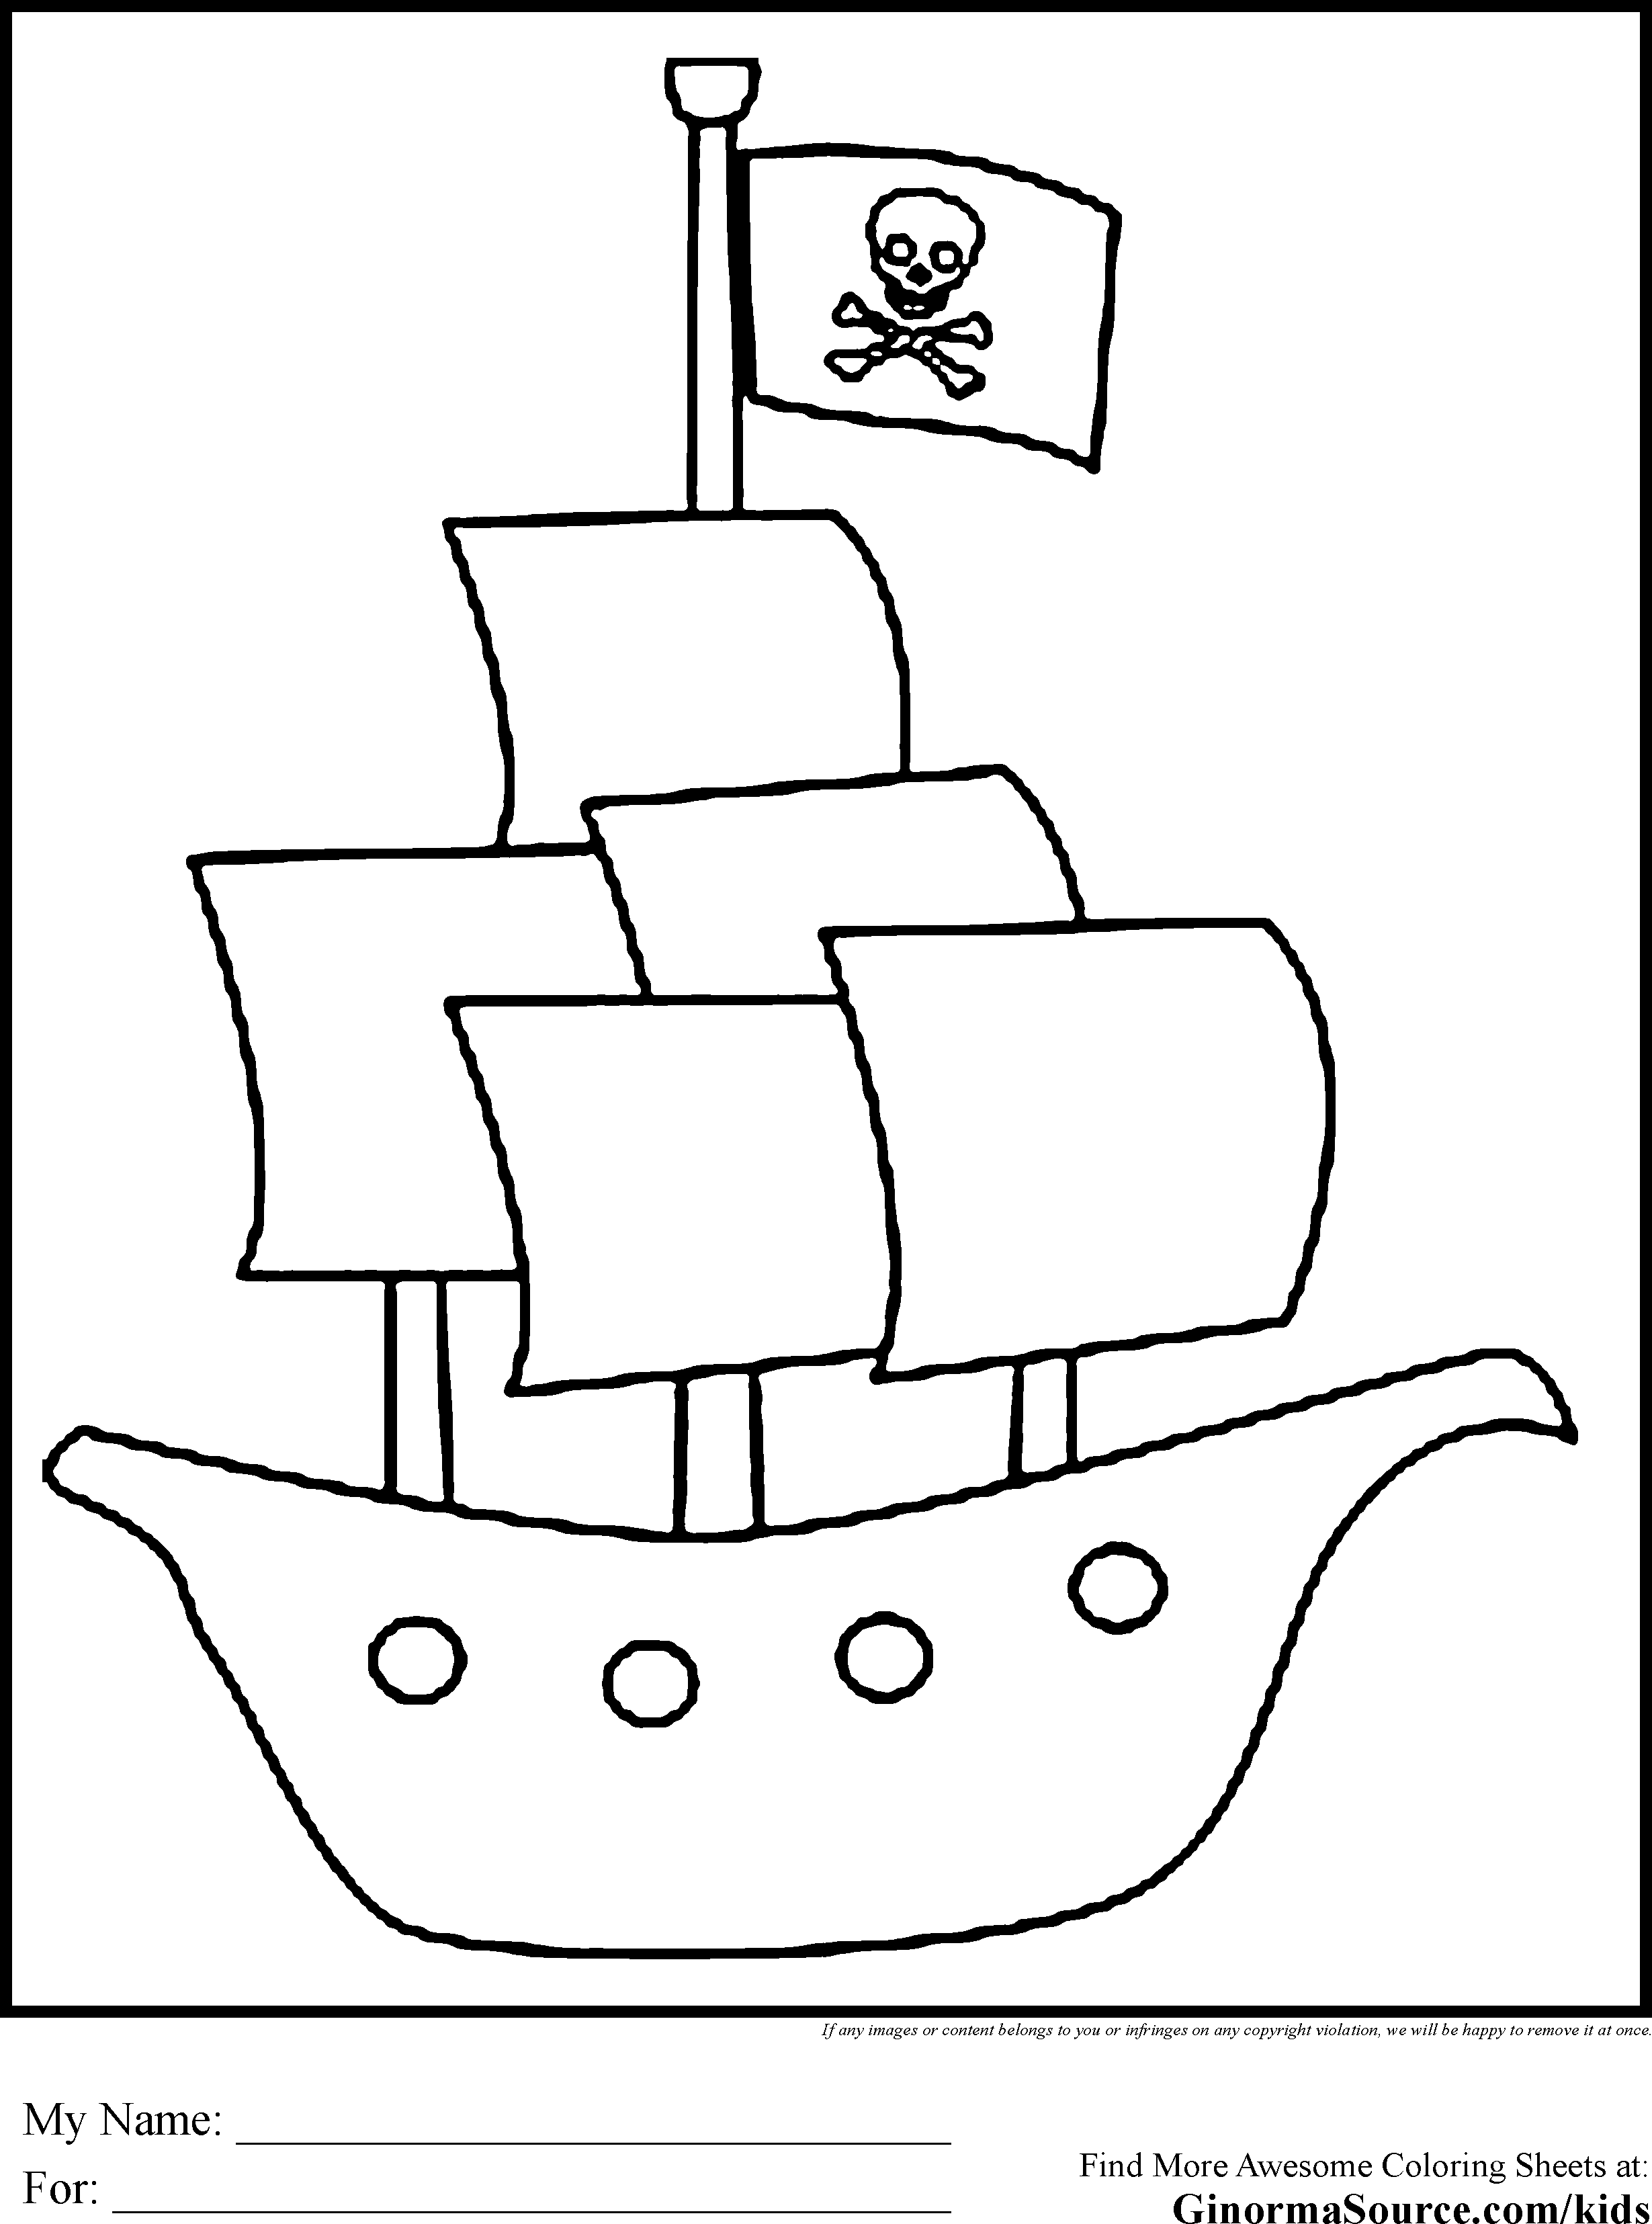 Pirate Coloring Pages Ginormasource Kids Pirate Coloring Pages Pirate Crafts Cartoon Pirate Ship